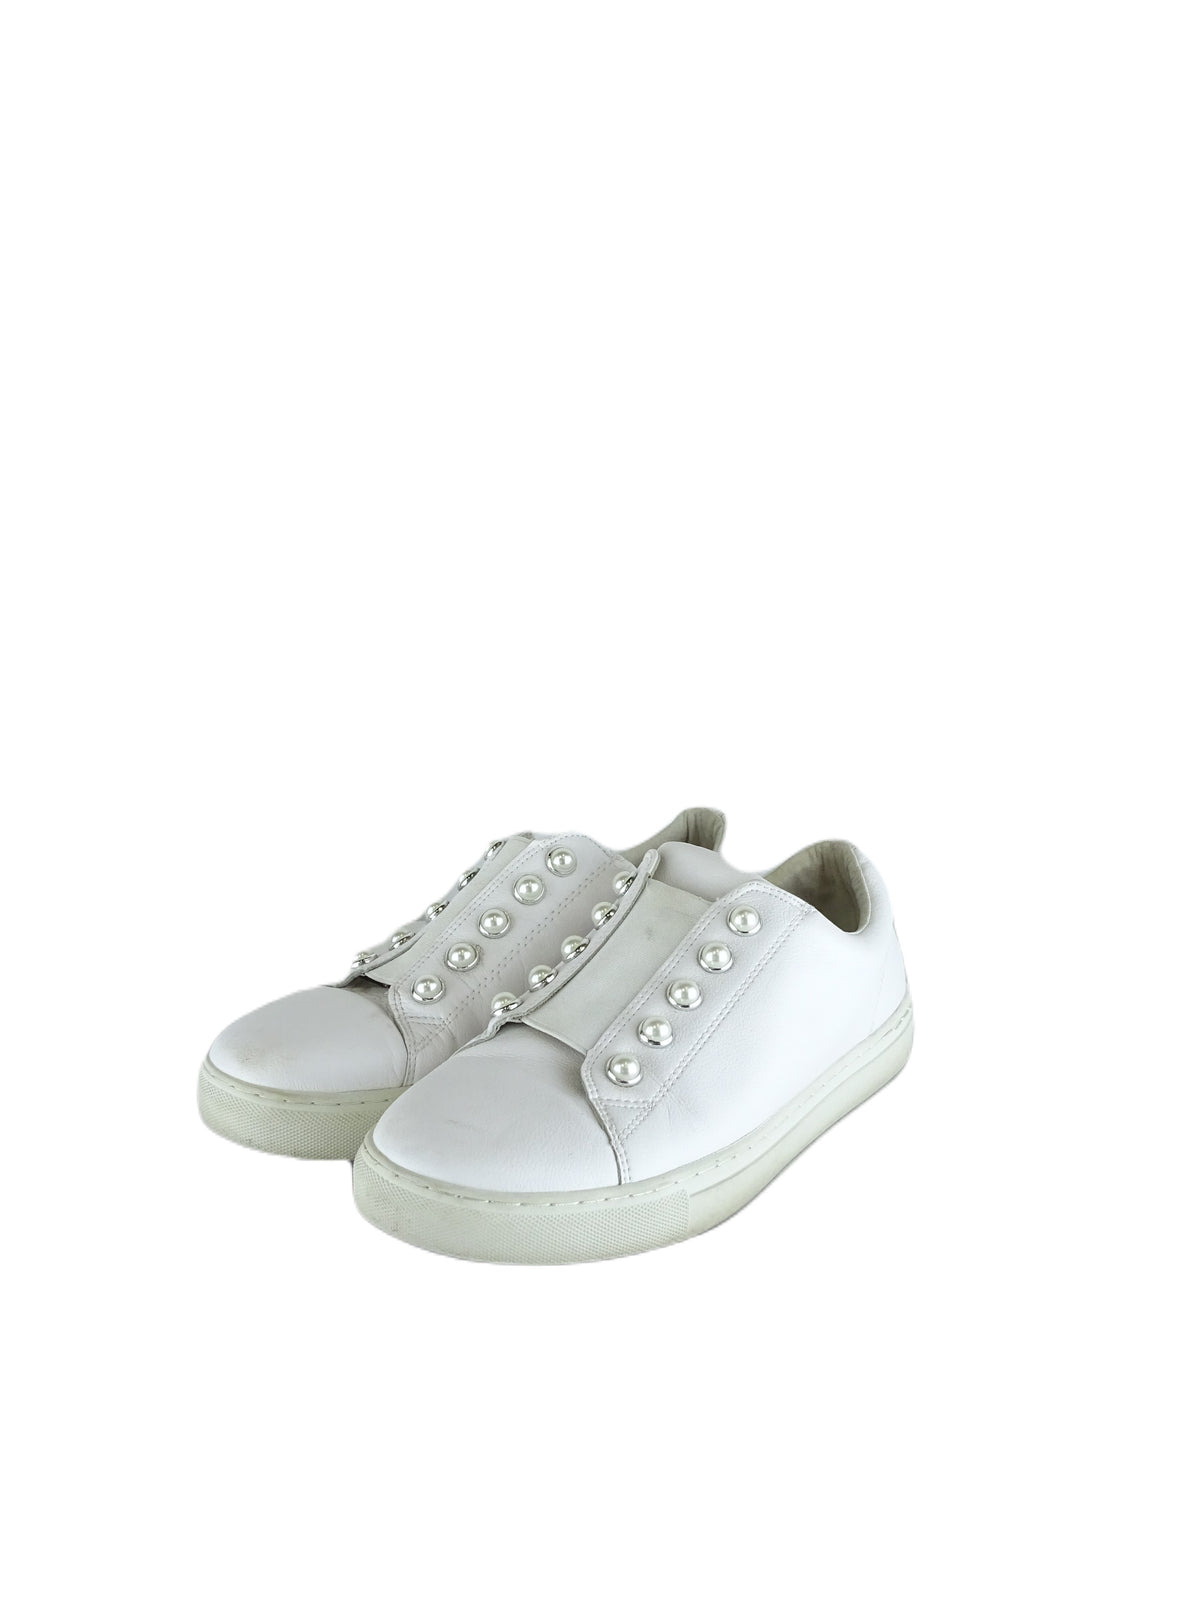 Blue Illusion White Leather Sneakers 40